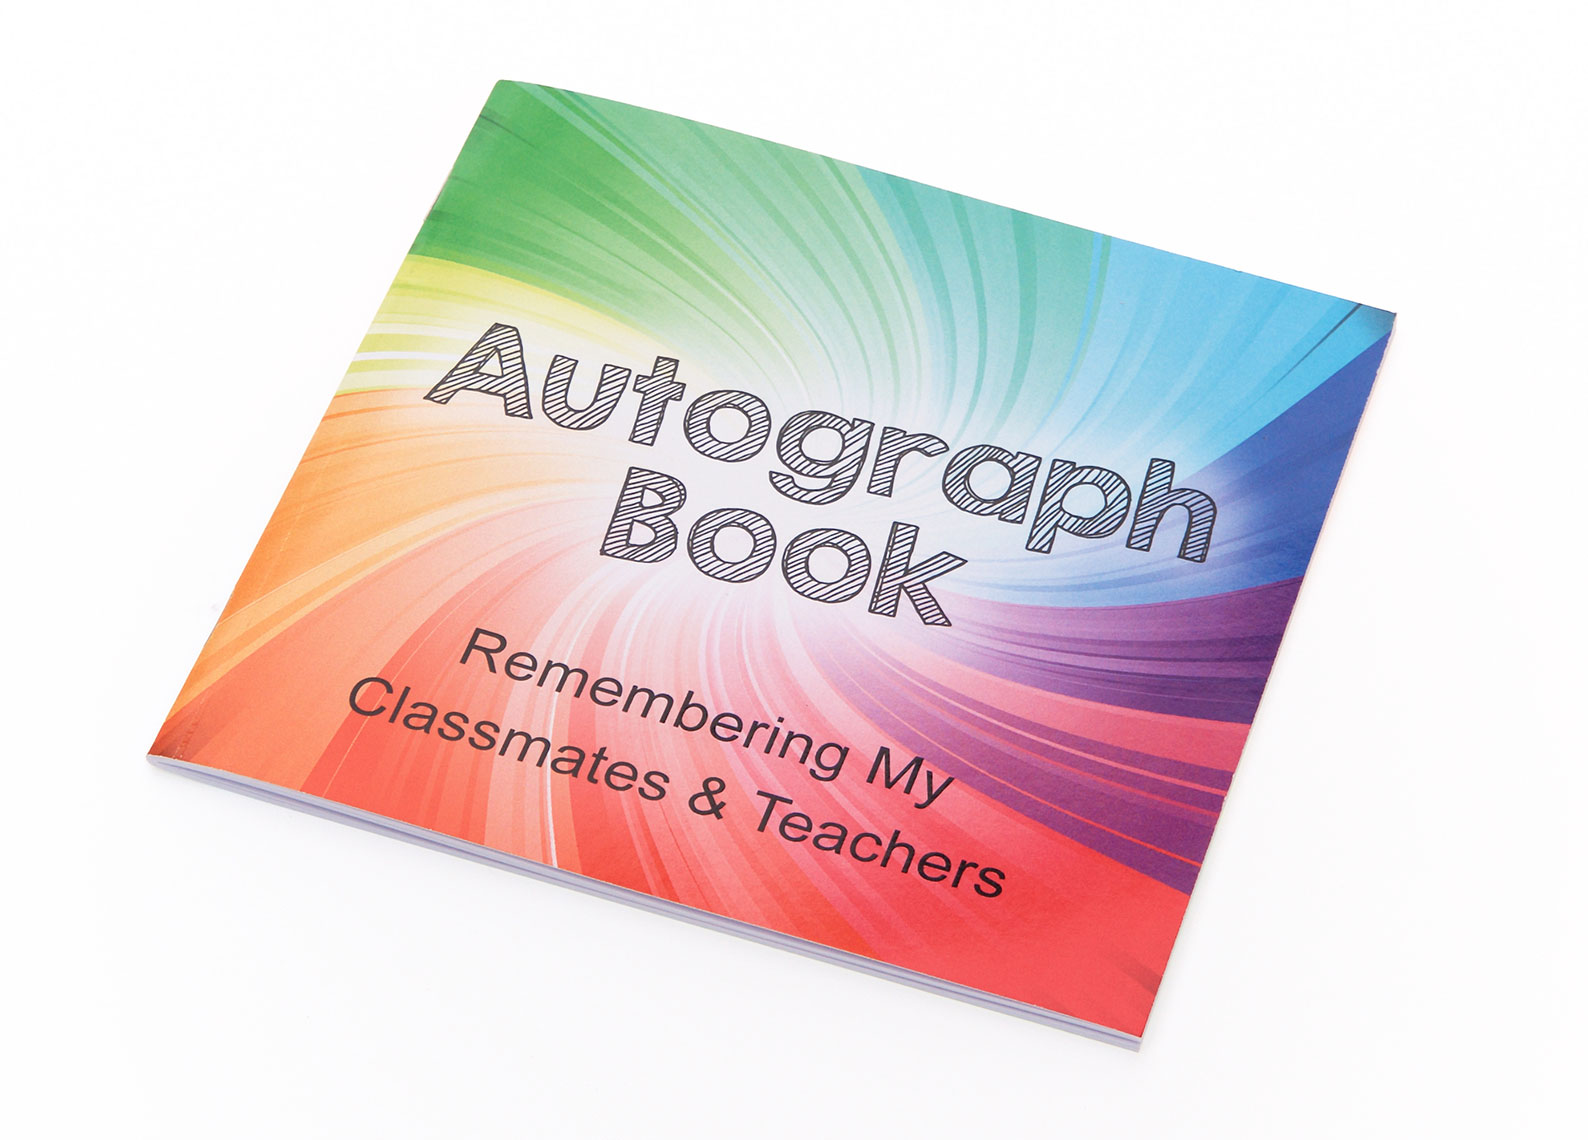 Personalised Autograph Books 